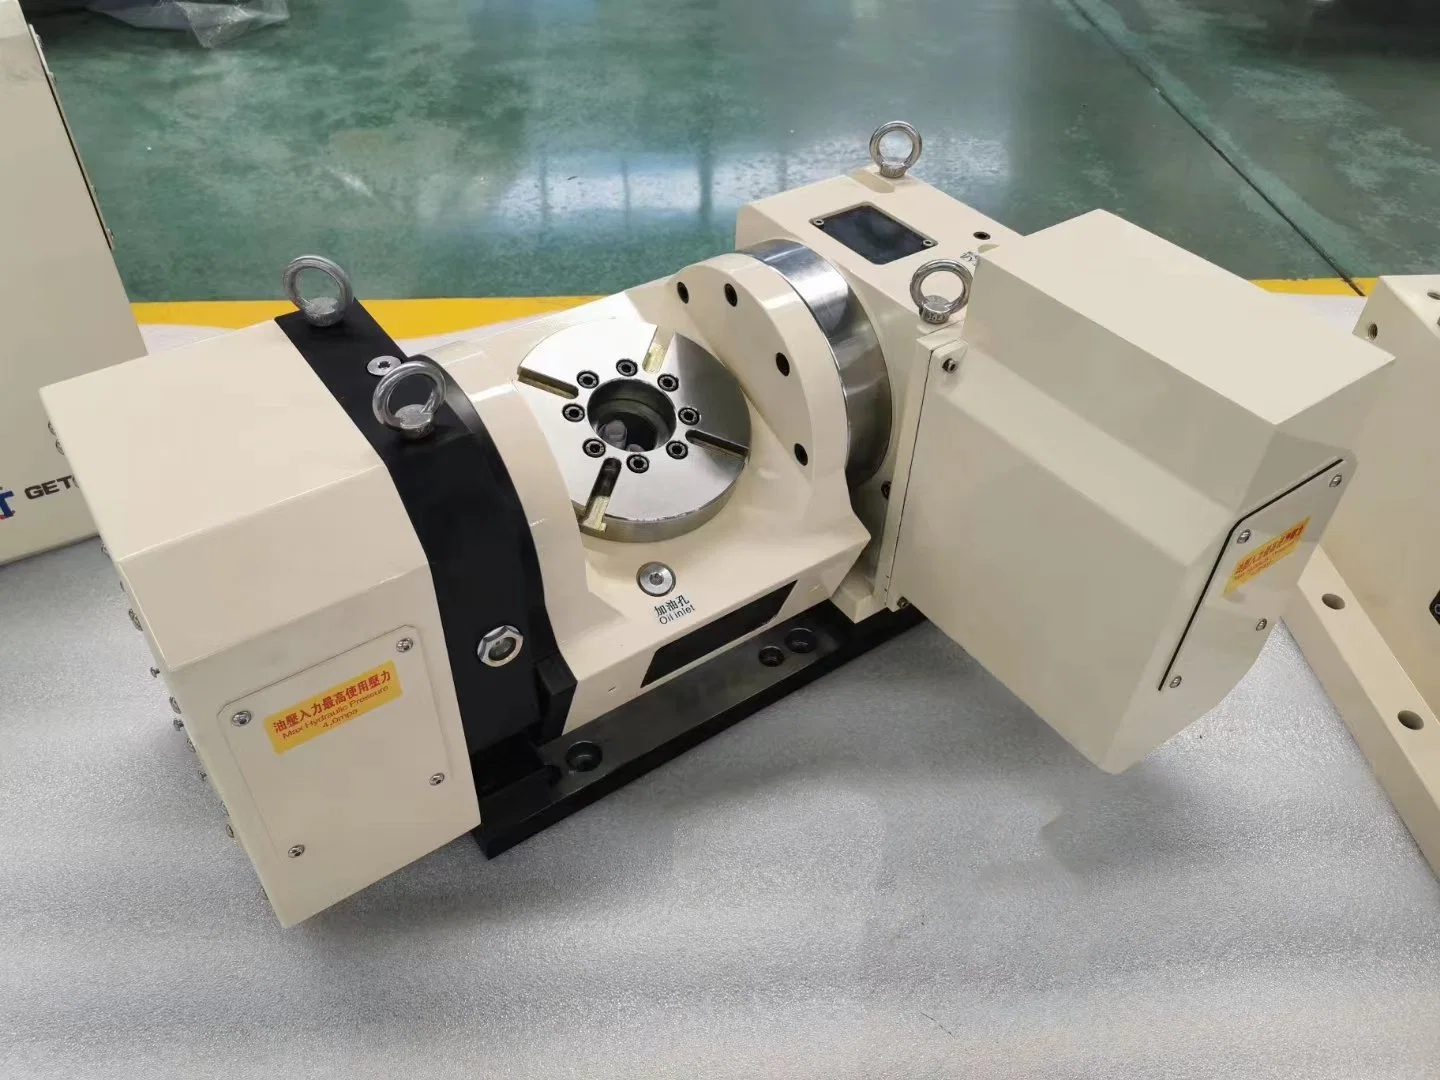 Vmc850 CNC Vertical Milling Machining Tool with 4th Axis Rotary Table